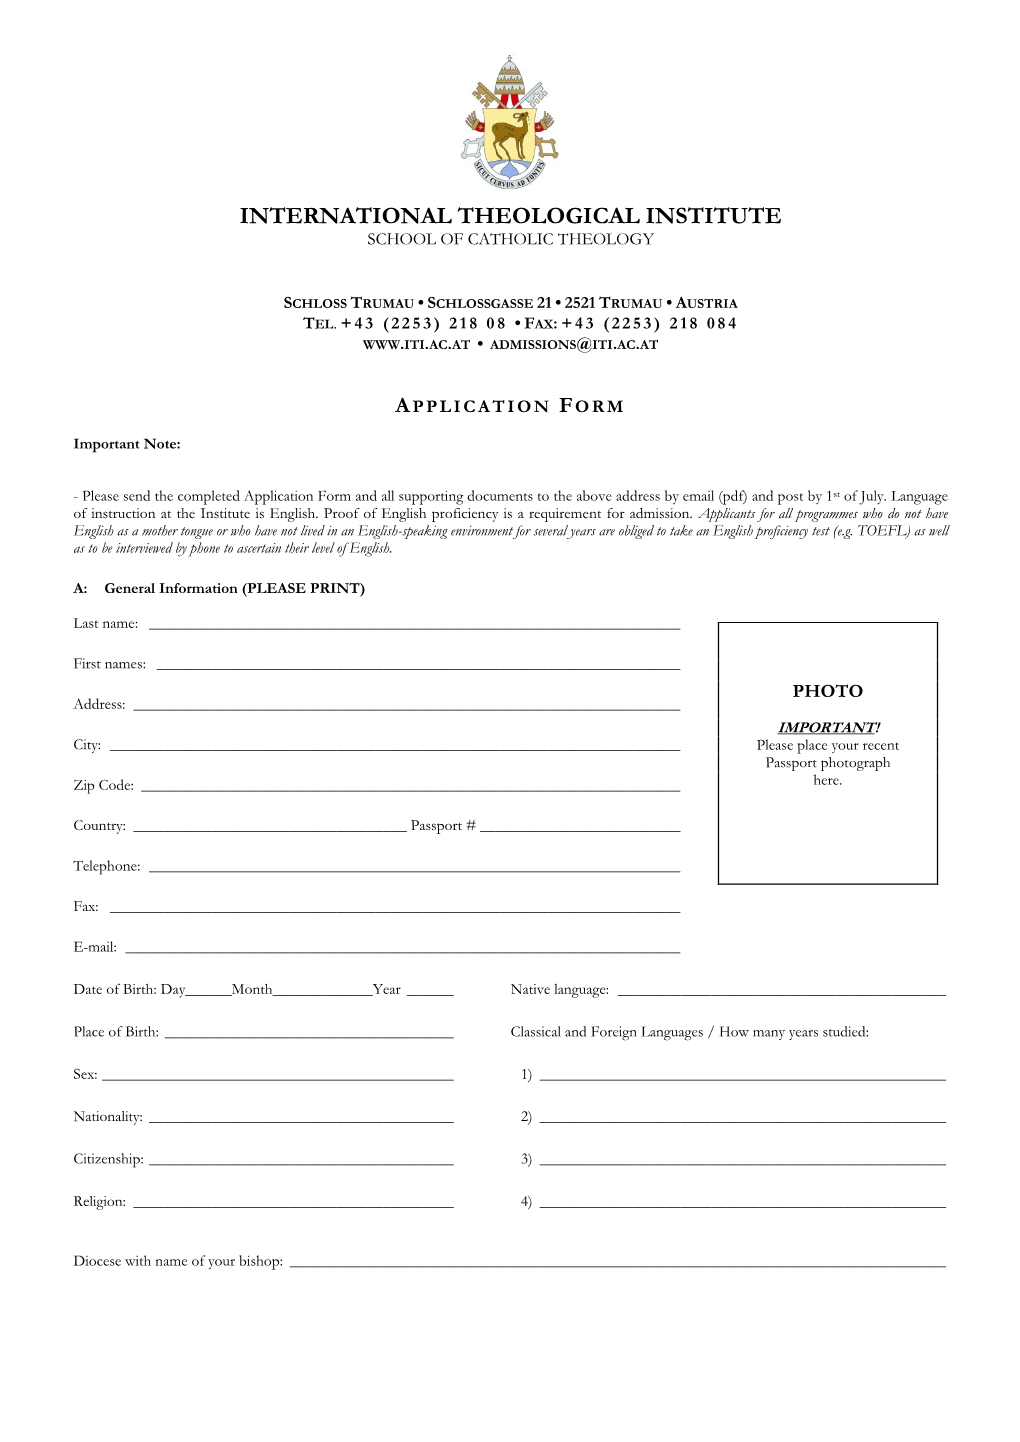 Application Form and All Supporting Documents to the Above Address by Email (Pdf) and Post by 1St of July